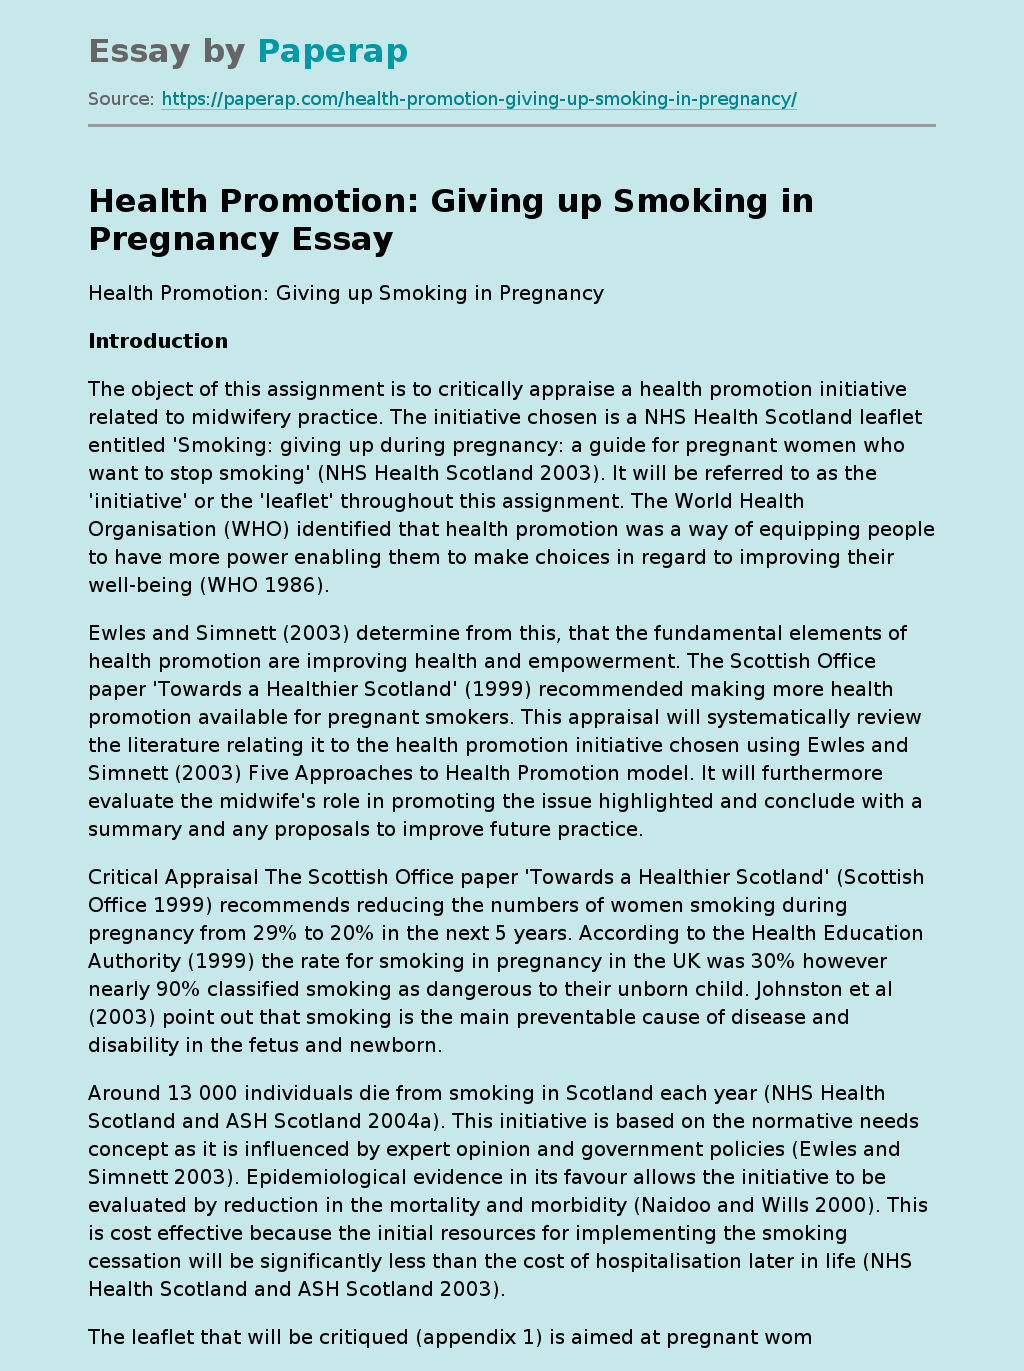 Health Promotion: Giving up Smoking in Pregnancy